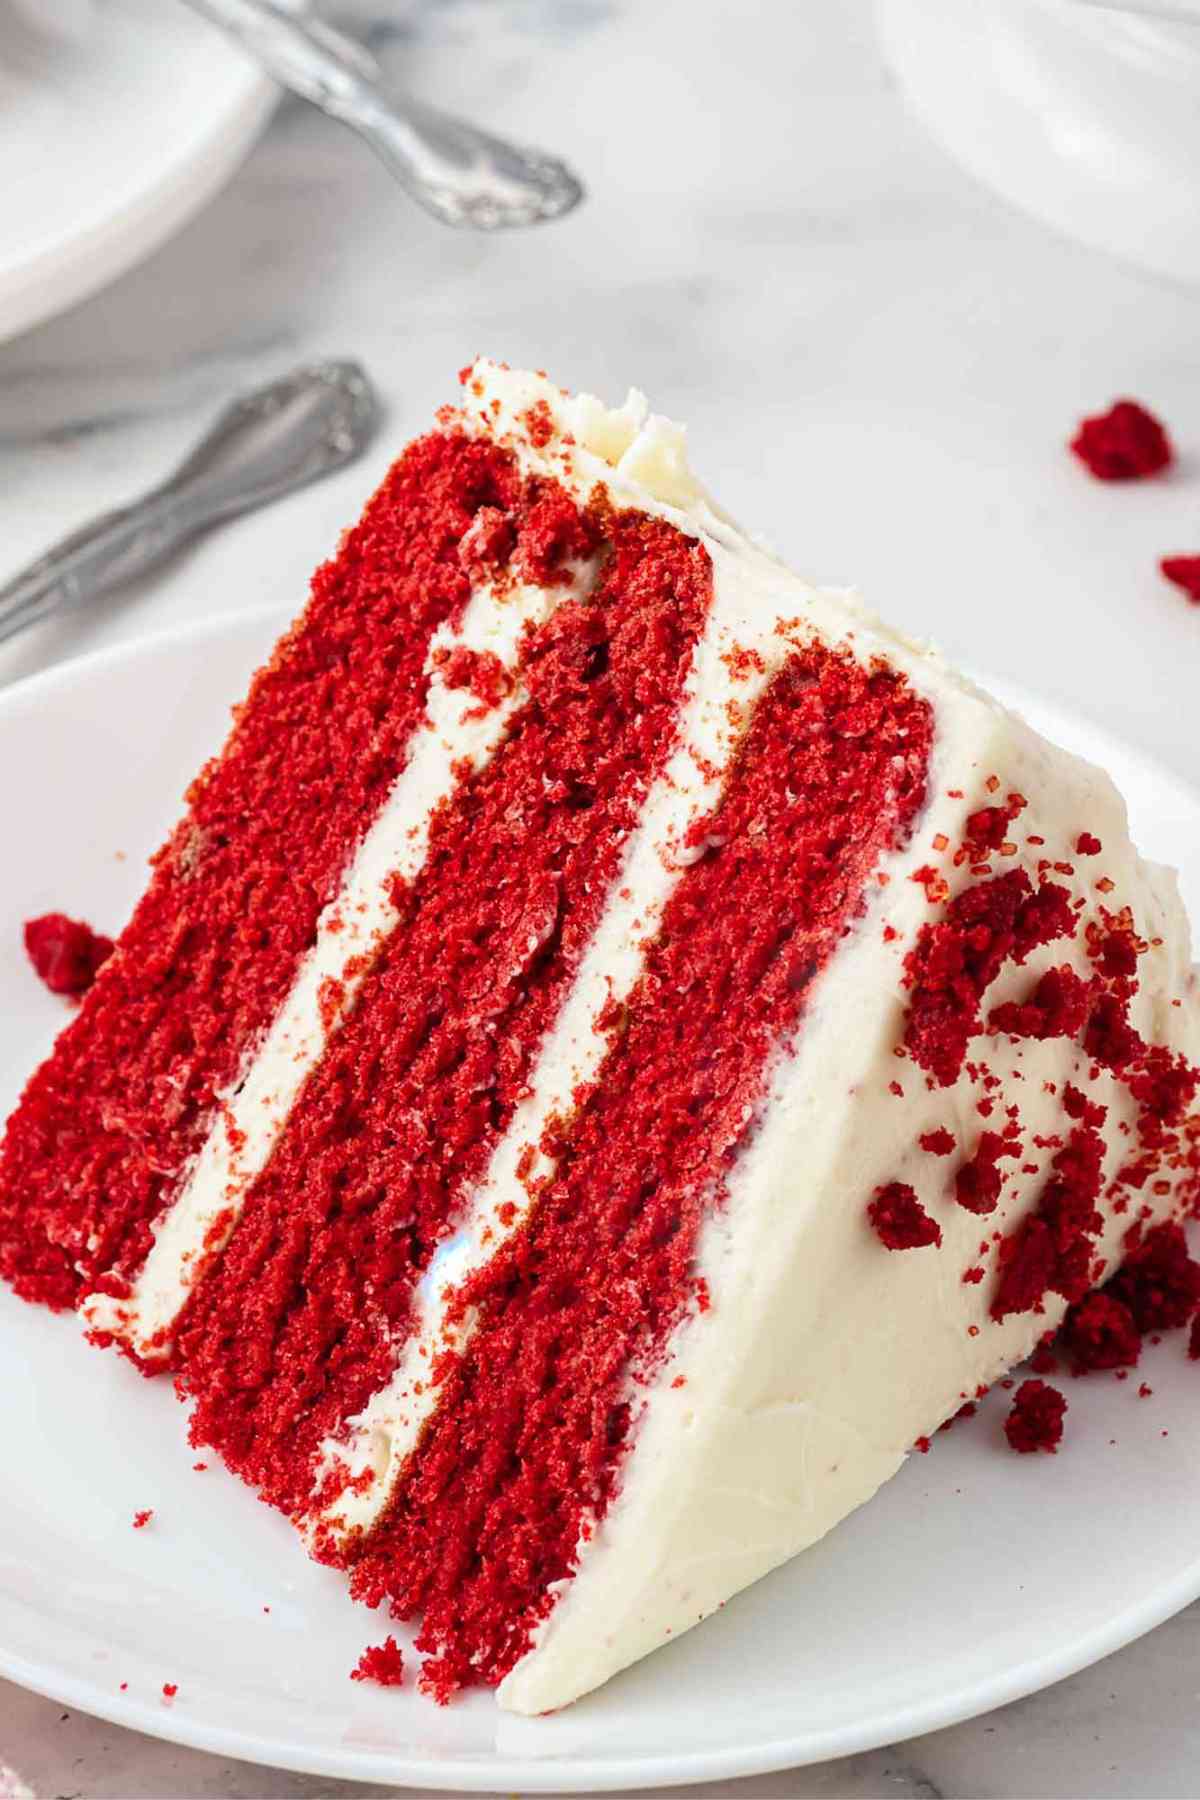 Large wedge slice of layered red velvet cake with white frosting.